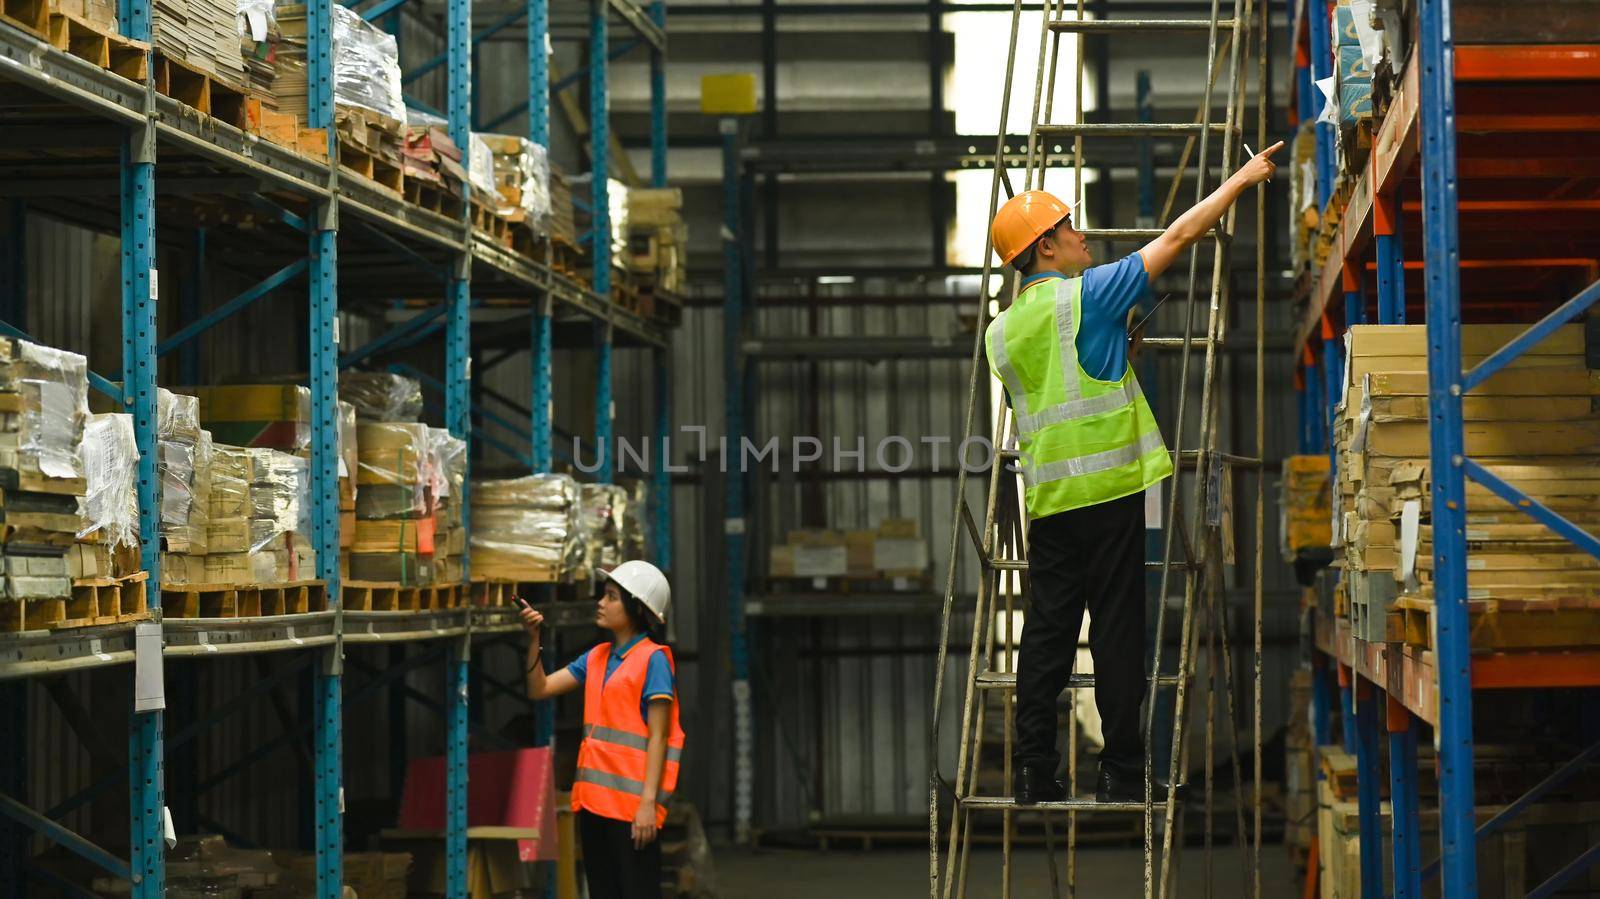 Workers working about shipment in logistic distribution warehouse with tall shelves full of packed boxes and goods by prathanchorruangsak